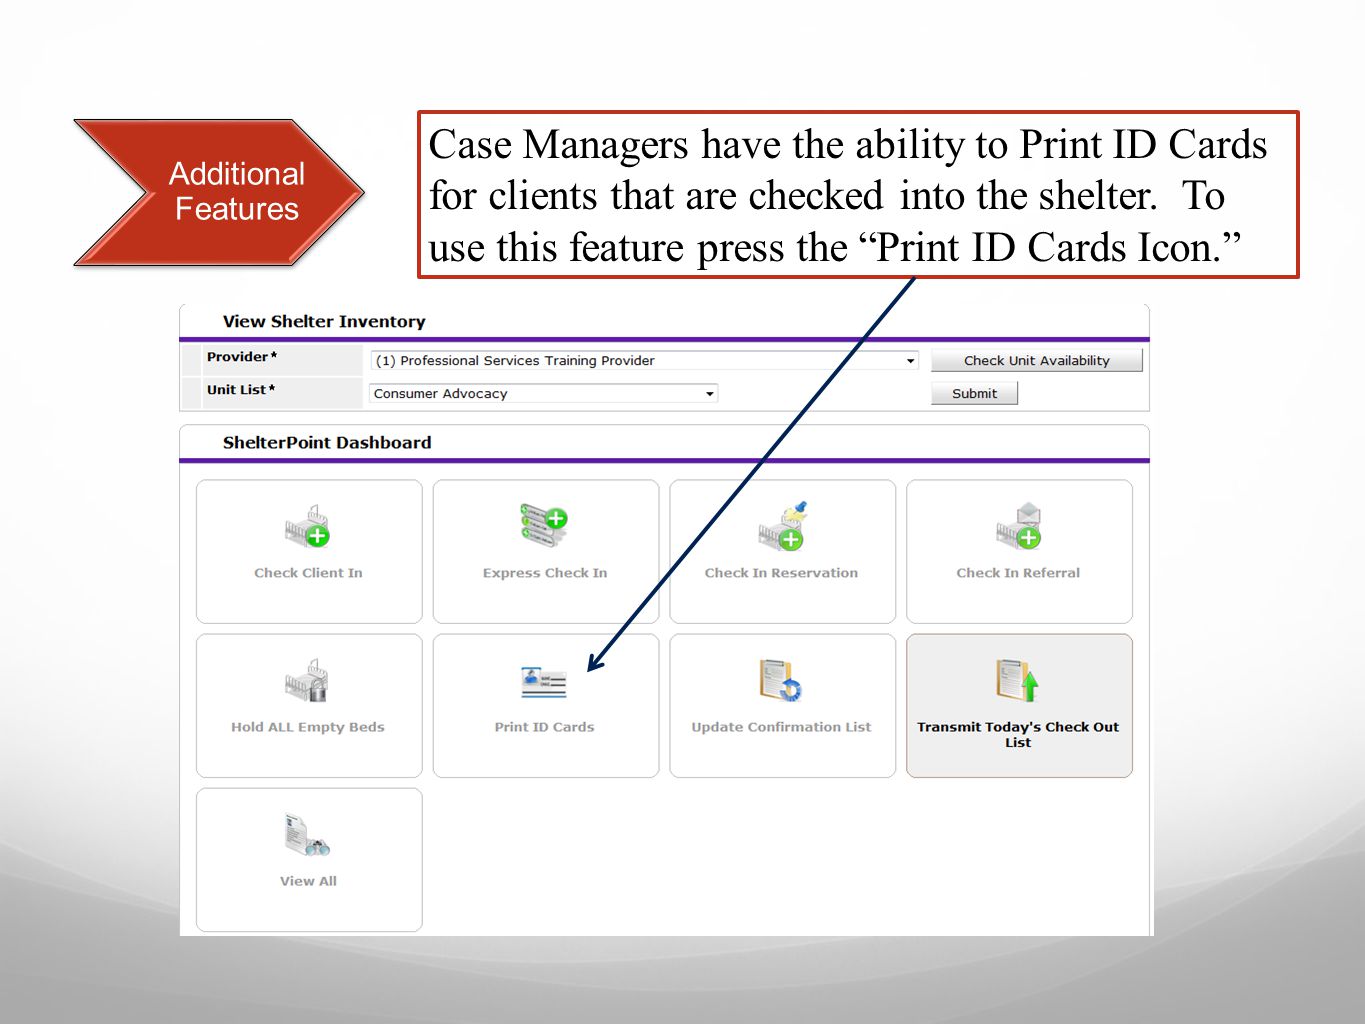 Additional Features Case Managers have the ability to Print ID Cards for clients that are checked into the shelter.